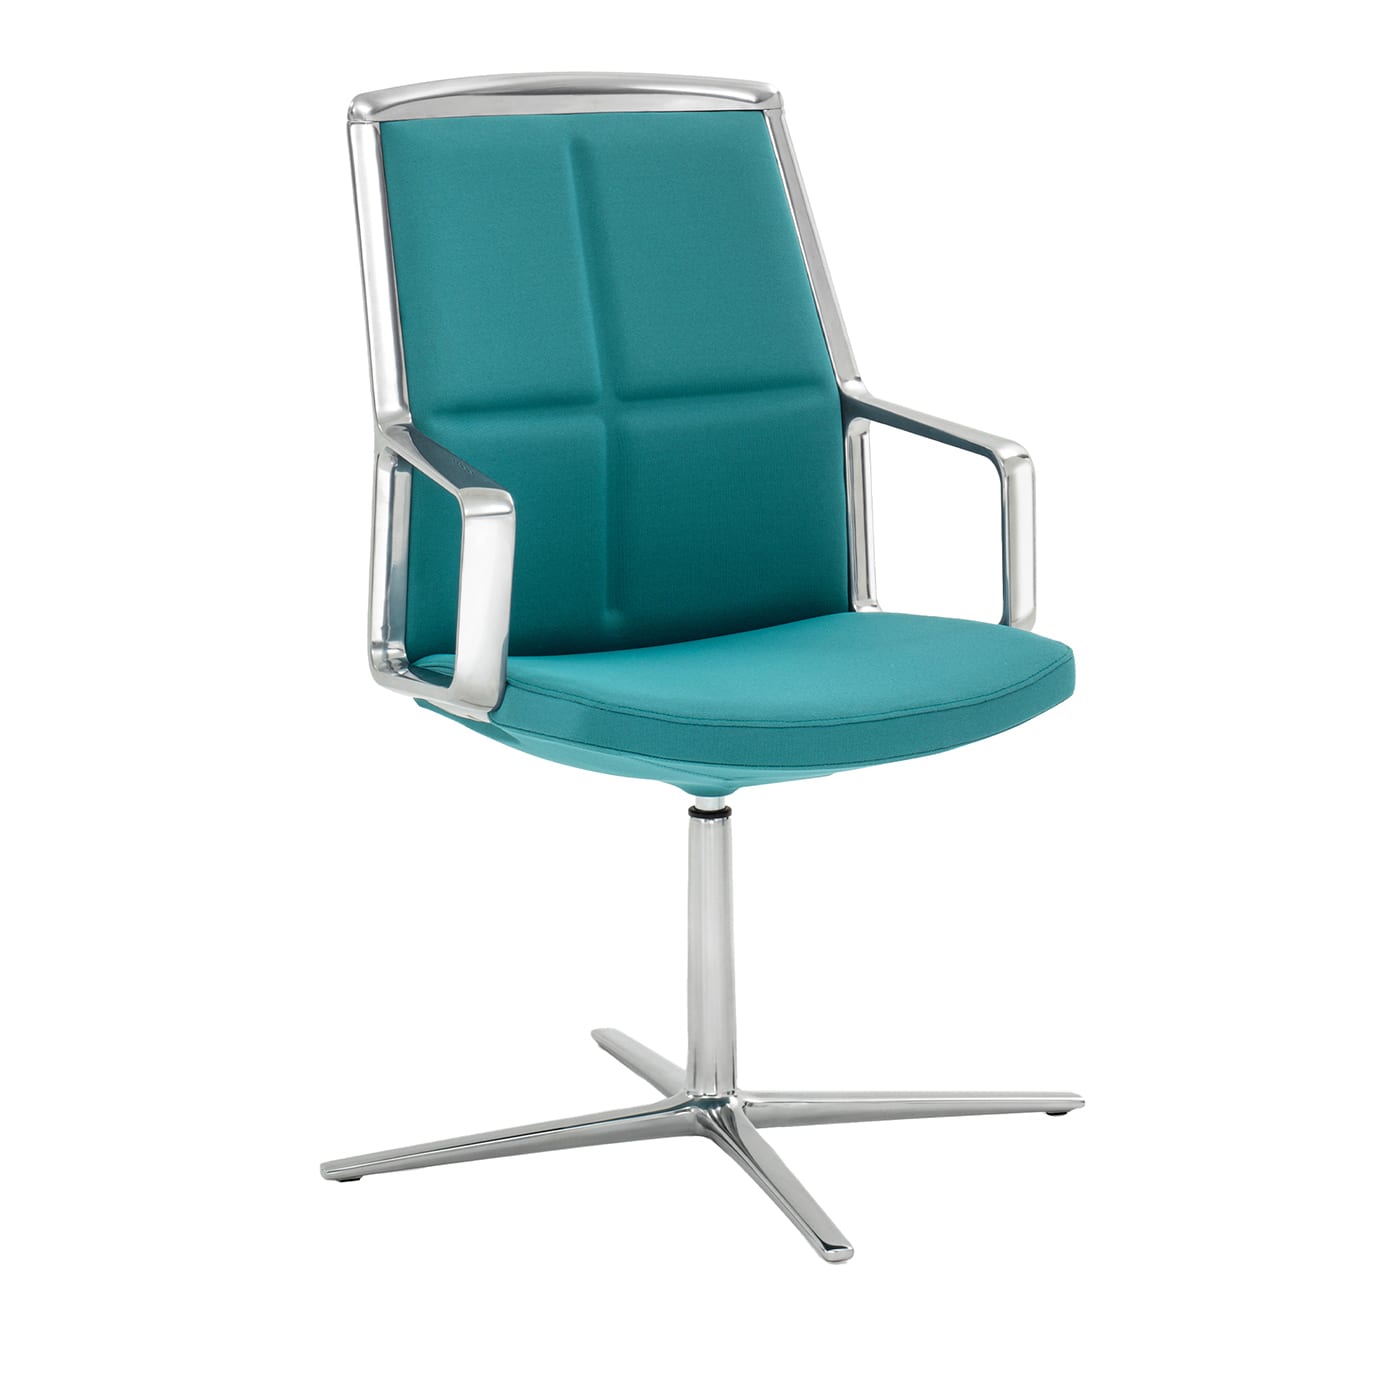 ADELE BLUE-GREEN MEETING CHAIR #1 by ORLANDINIDESIGN - Viganò & C.